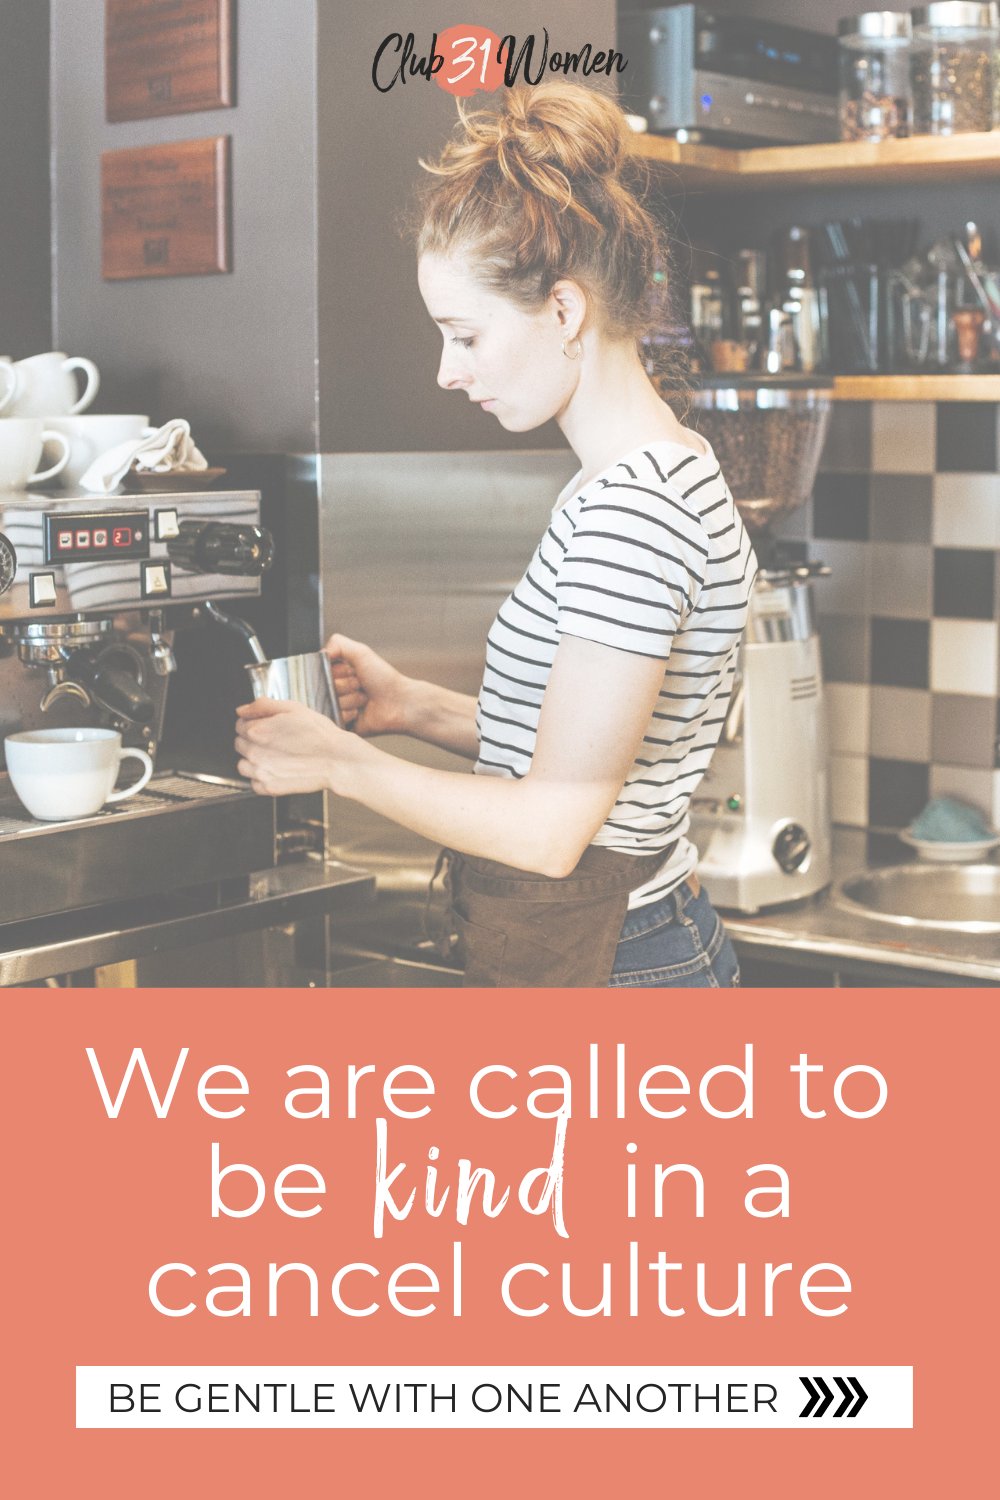 We live in a culture where being right is more valued than being kind. But we are called to something greater and can change the climate around us. via @Club31Women